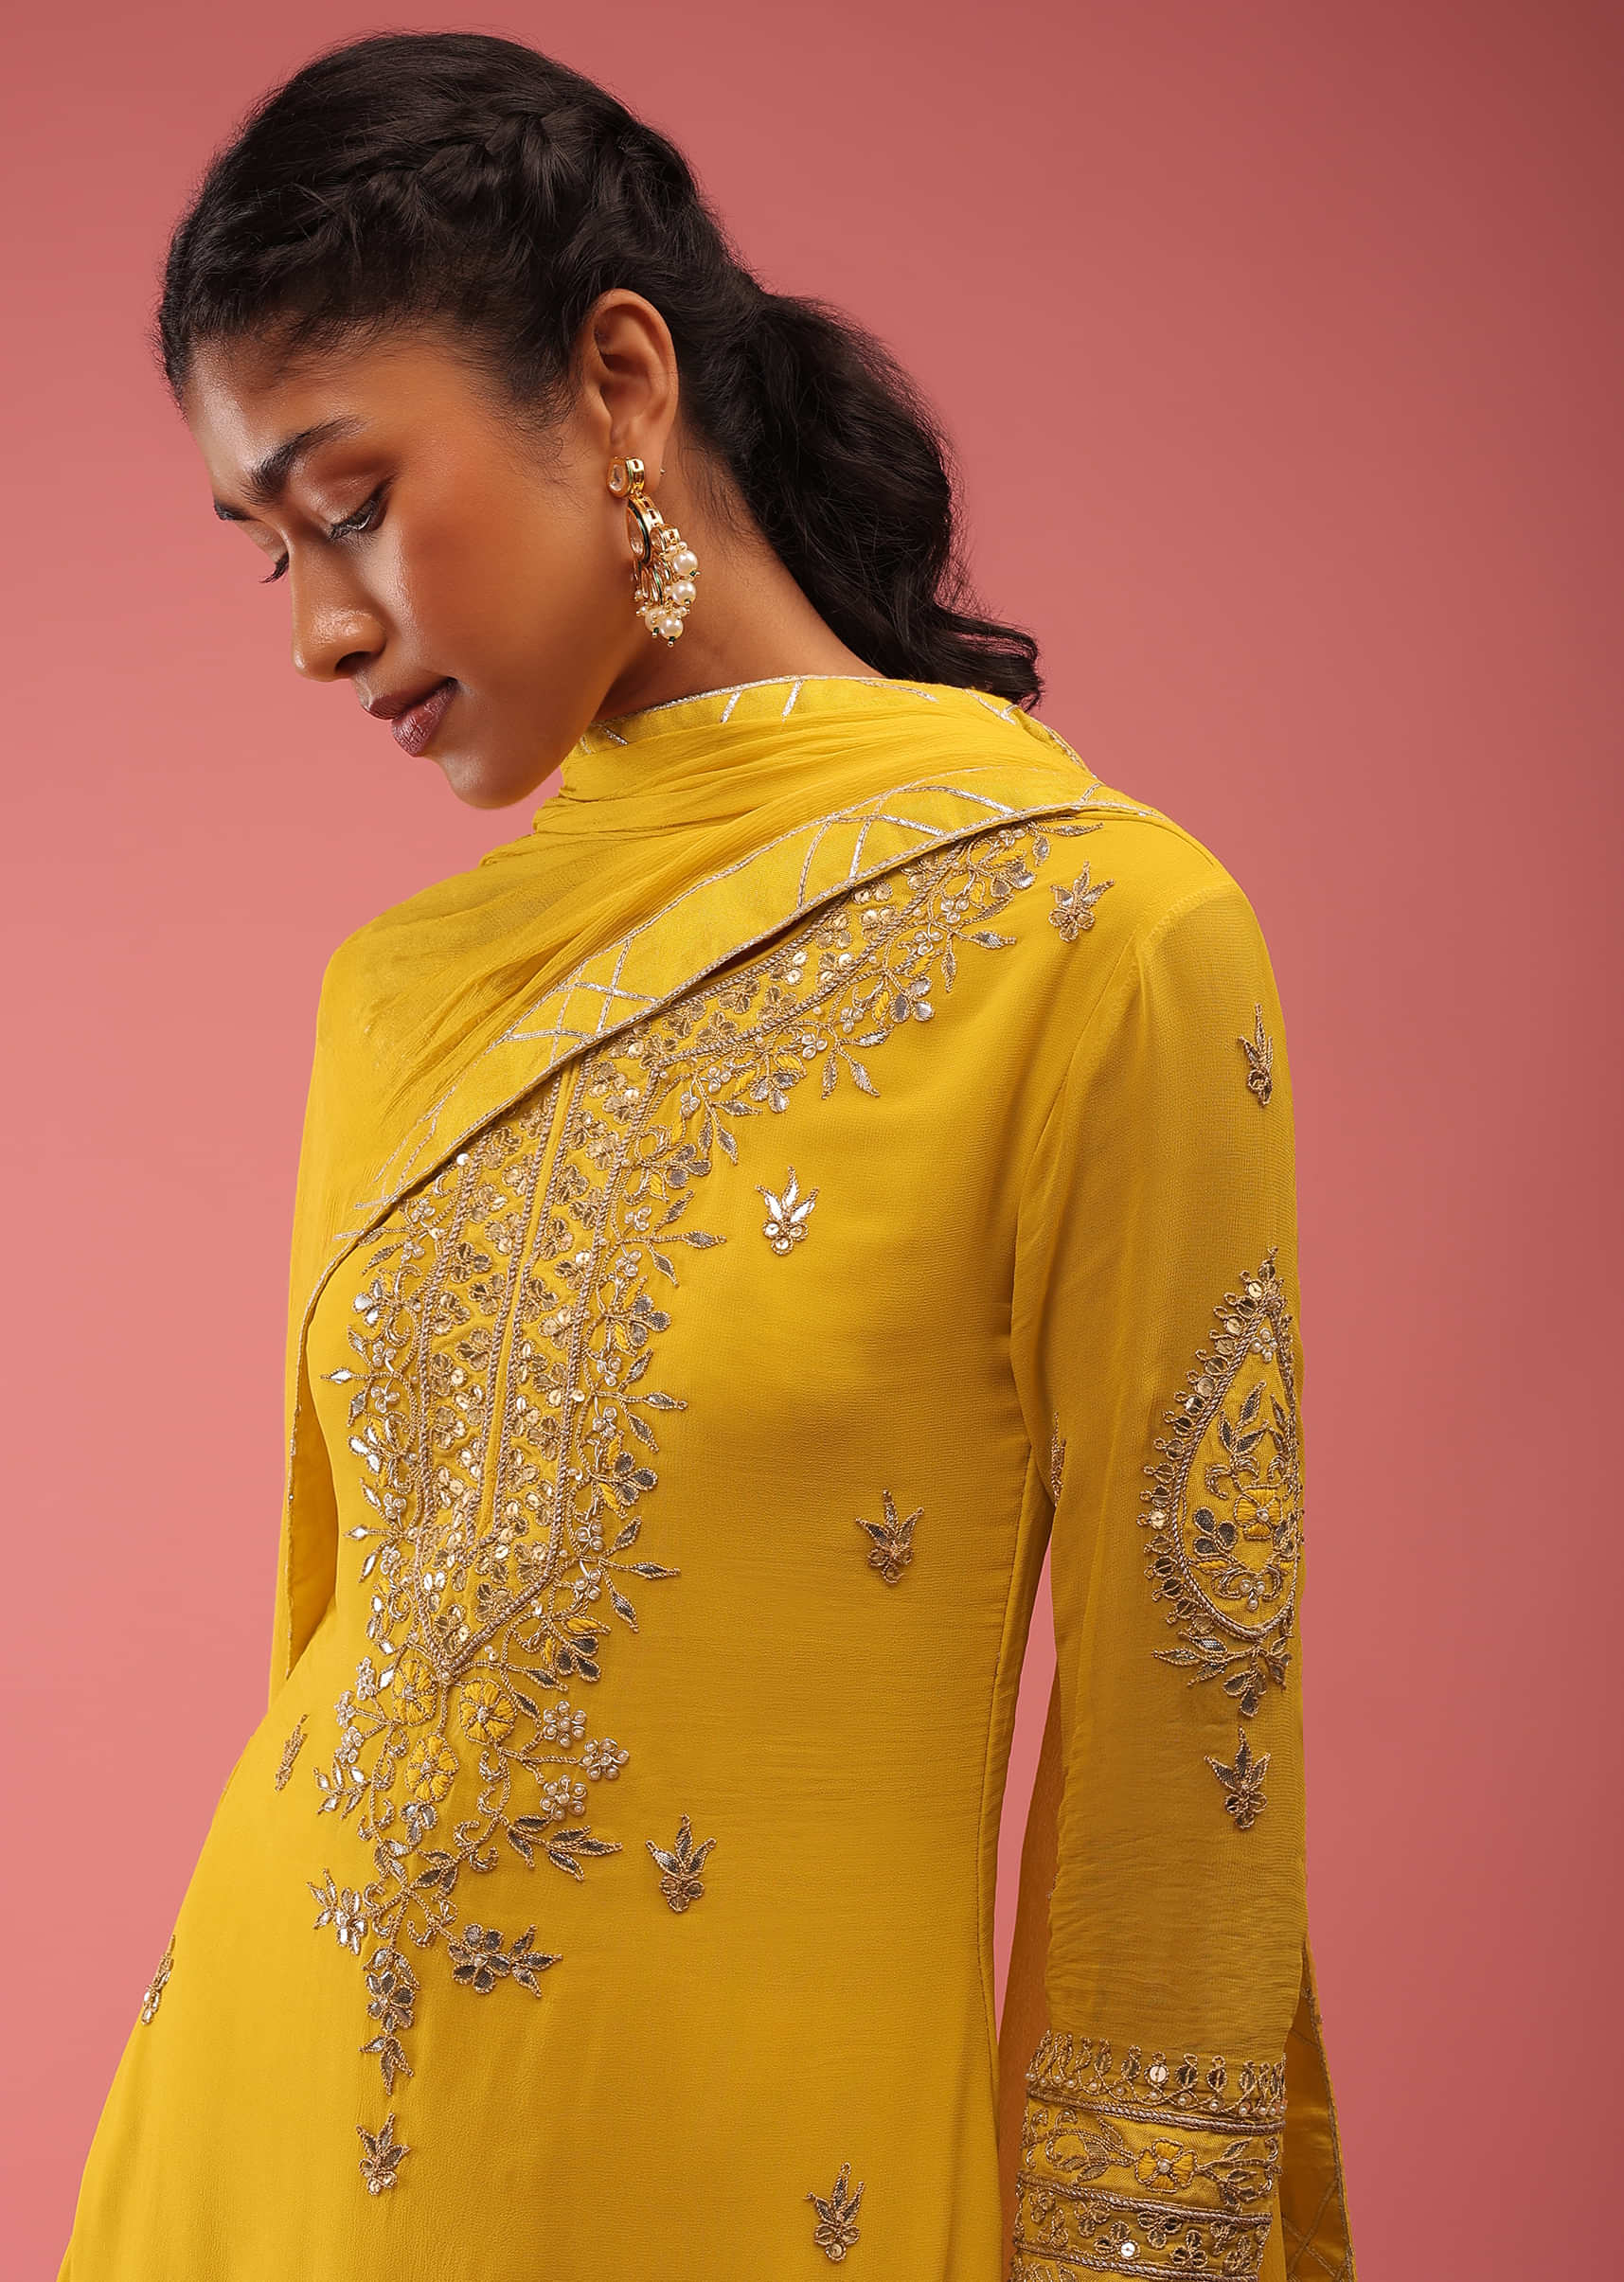 Freesia Yellow Sharara Suit In Gotta Pati Embroidery, Crafted In Georgette With A Round Neckline